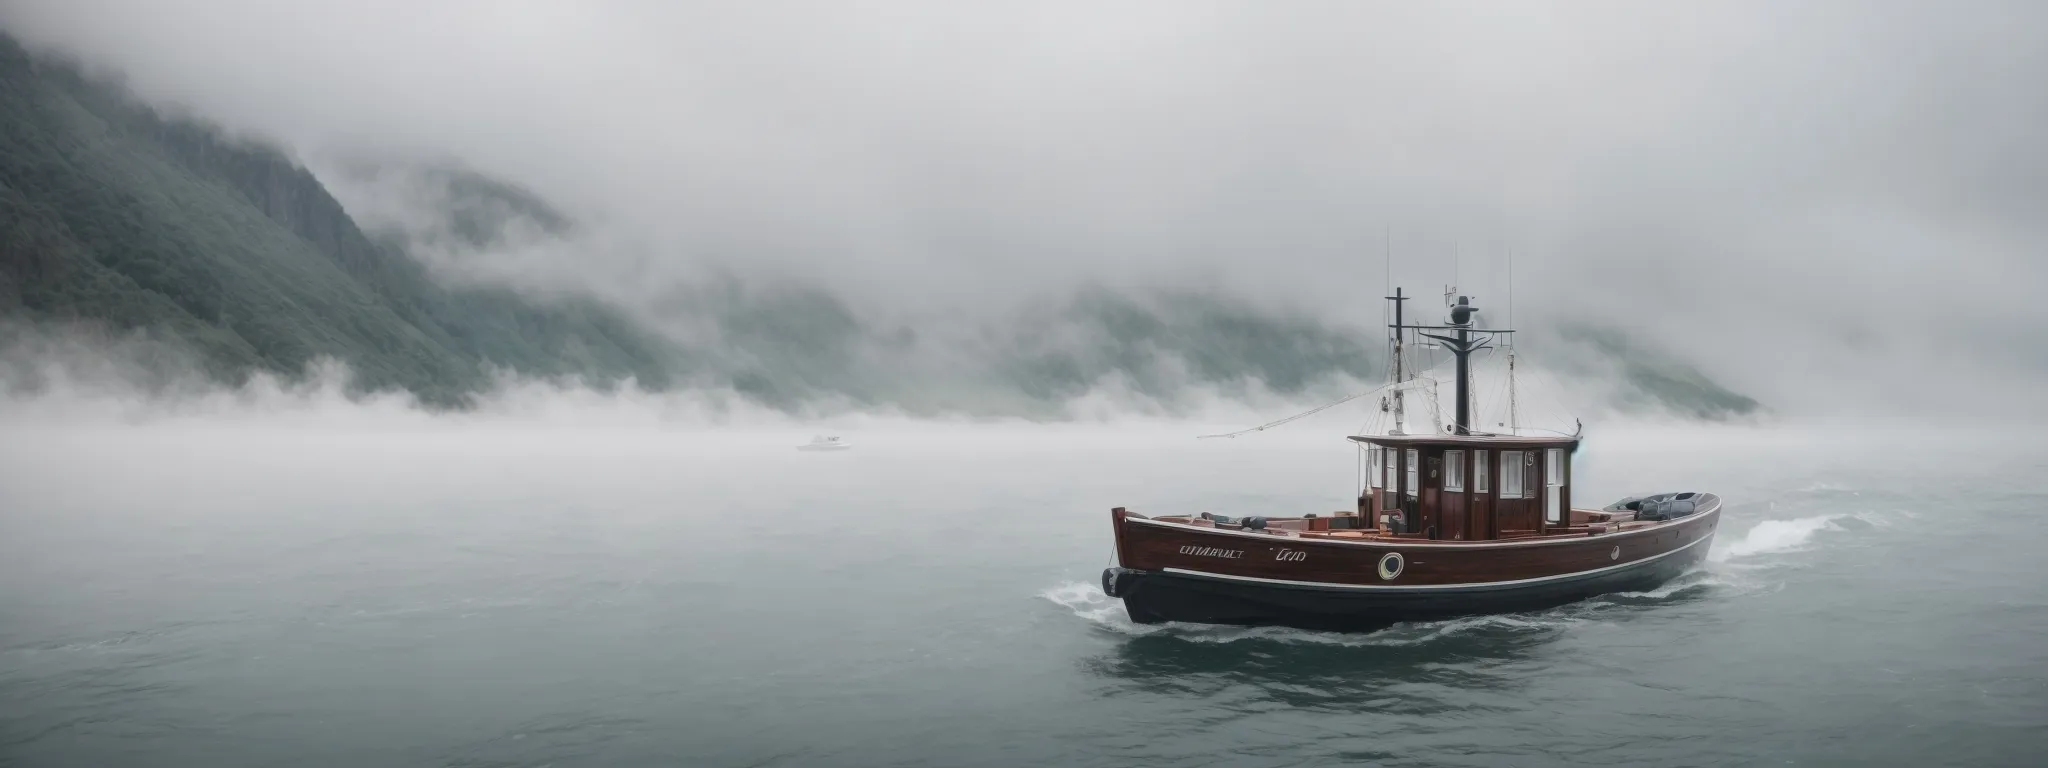 a boat navigates through a foggy and ever-shifting landscape, symbolizing the unpredictable and non-guaranteed nature of seo success in the vast ocean of digital marketing.